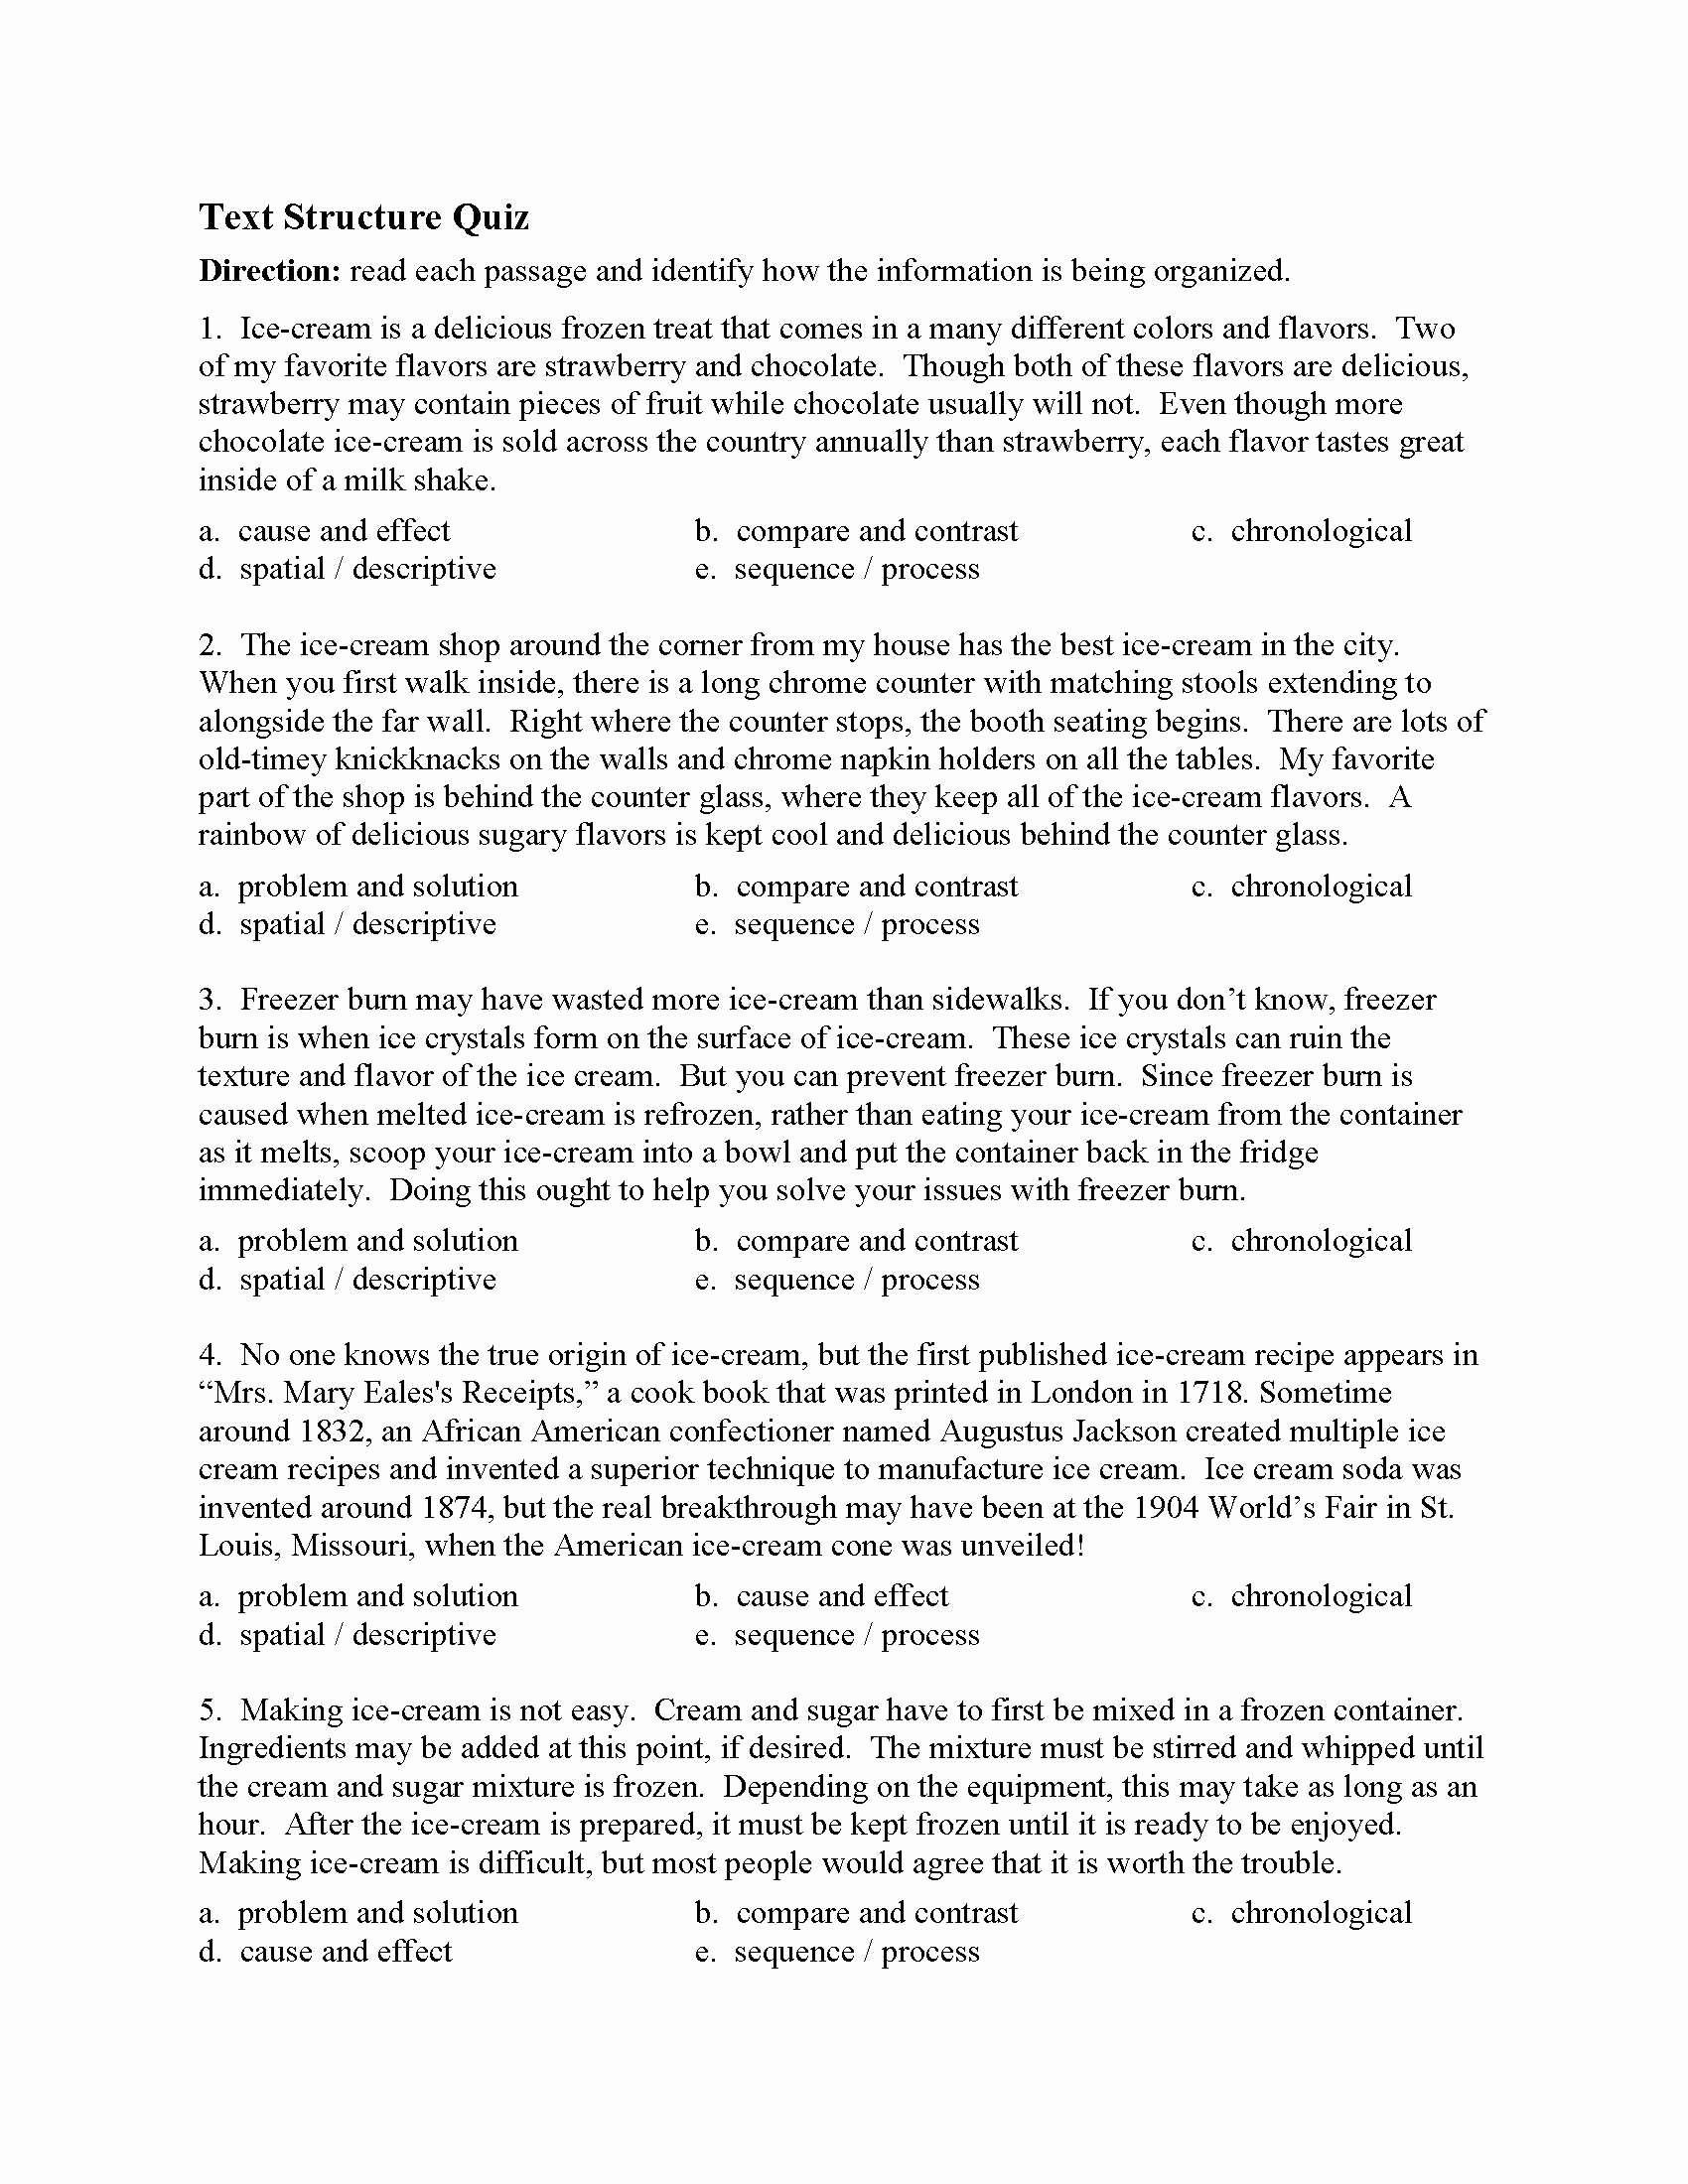 Text Structure Practice Worksheets Lovely Text Structure Quiz 1